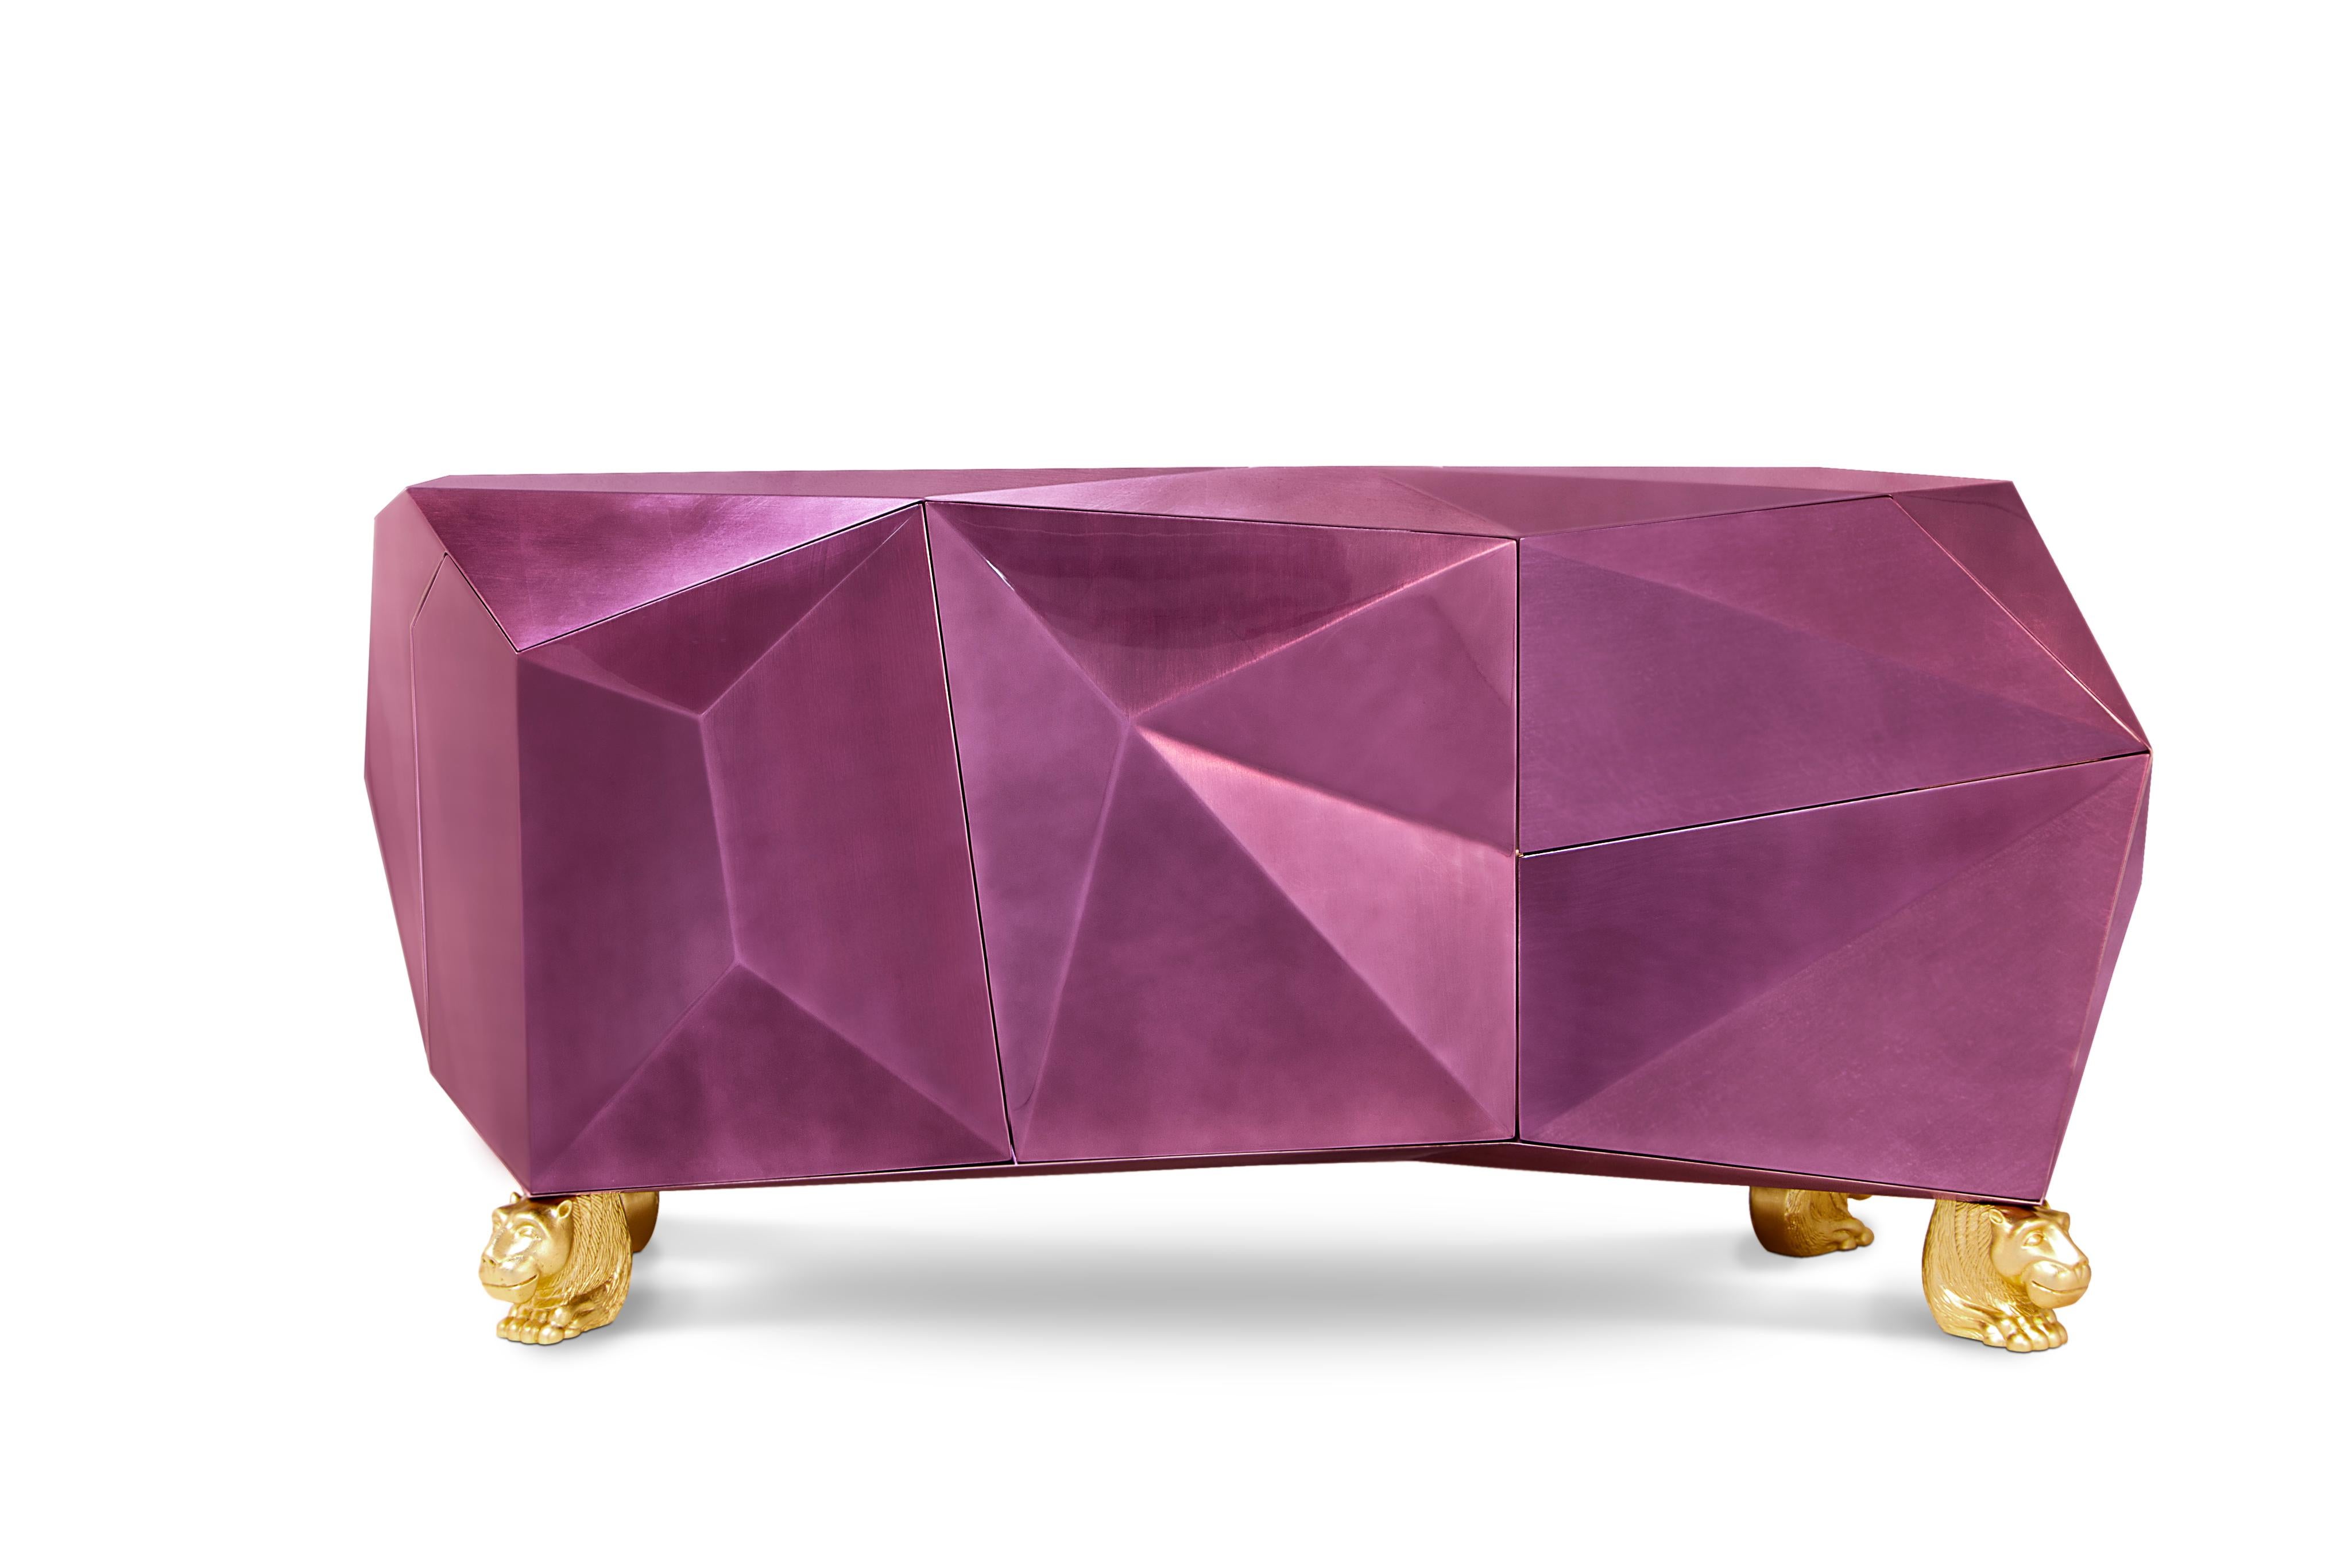 Projected to be the jewel in the crown of the Portuguese brand Boca do Lobo, the Diamond Sideboard is a reflection of the furniture jeweler’s expertise and quintessence, undoubtedly deserving its title. This opulent object, full of resources and